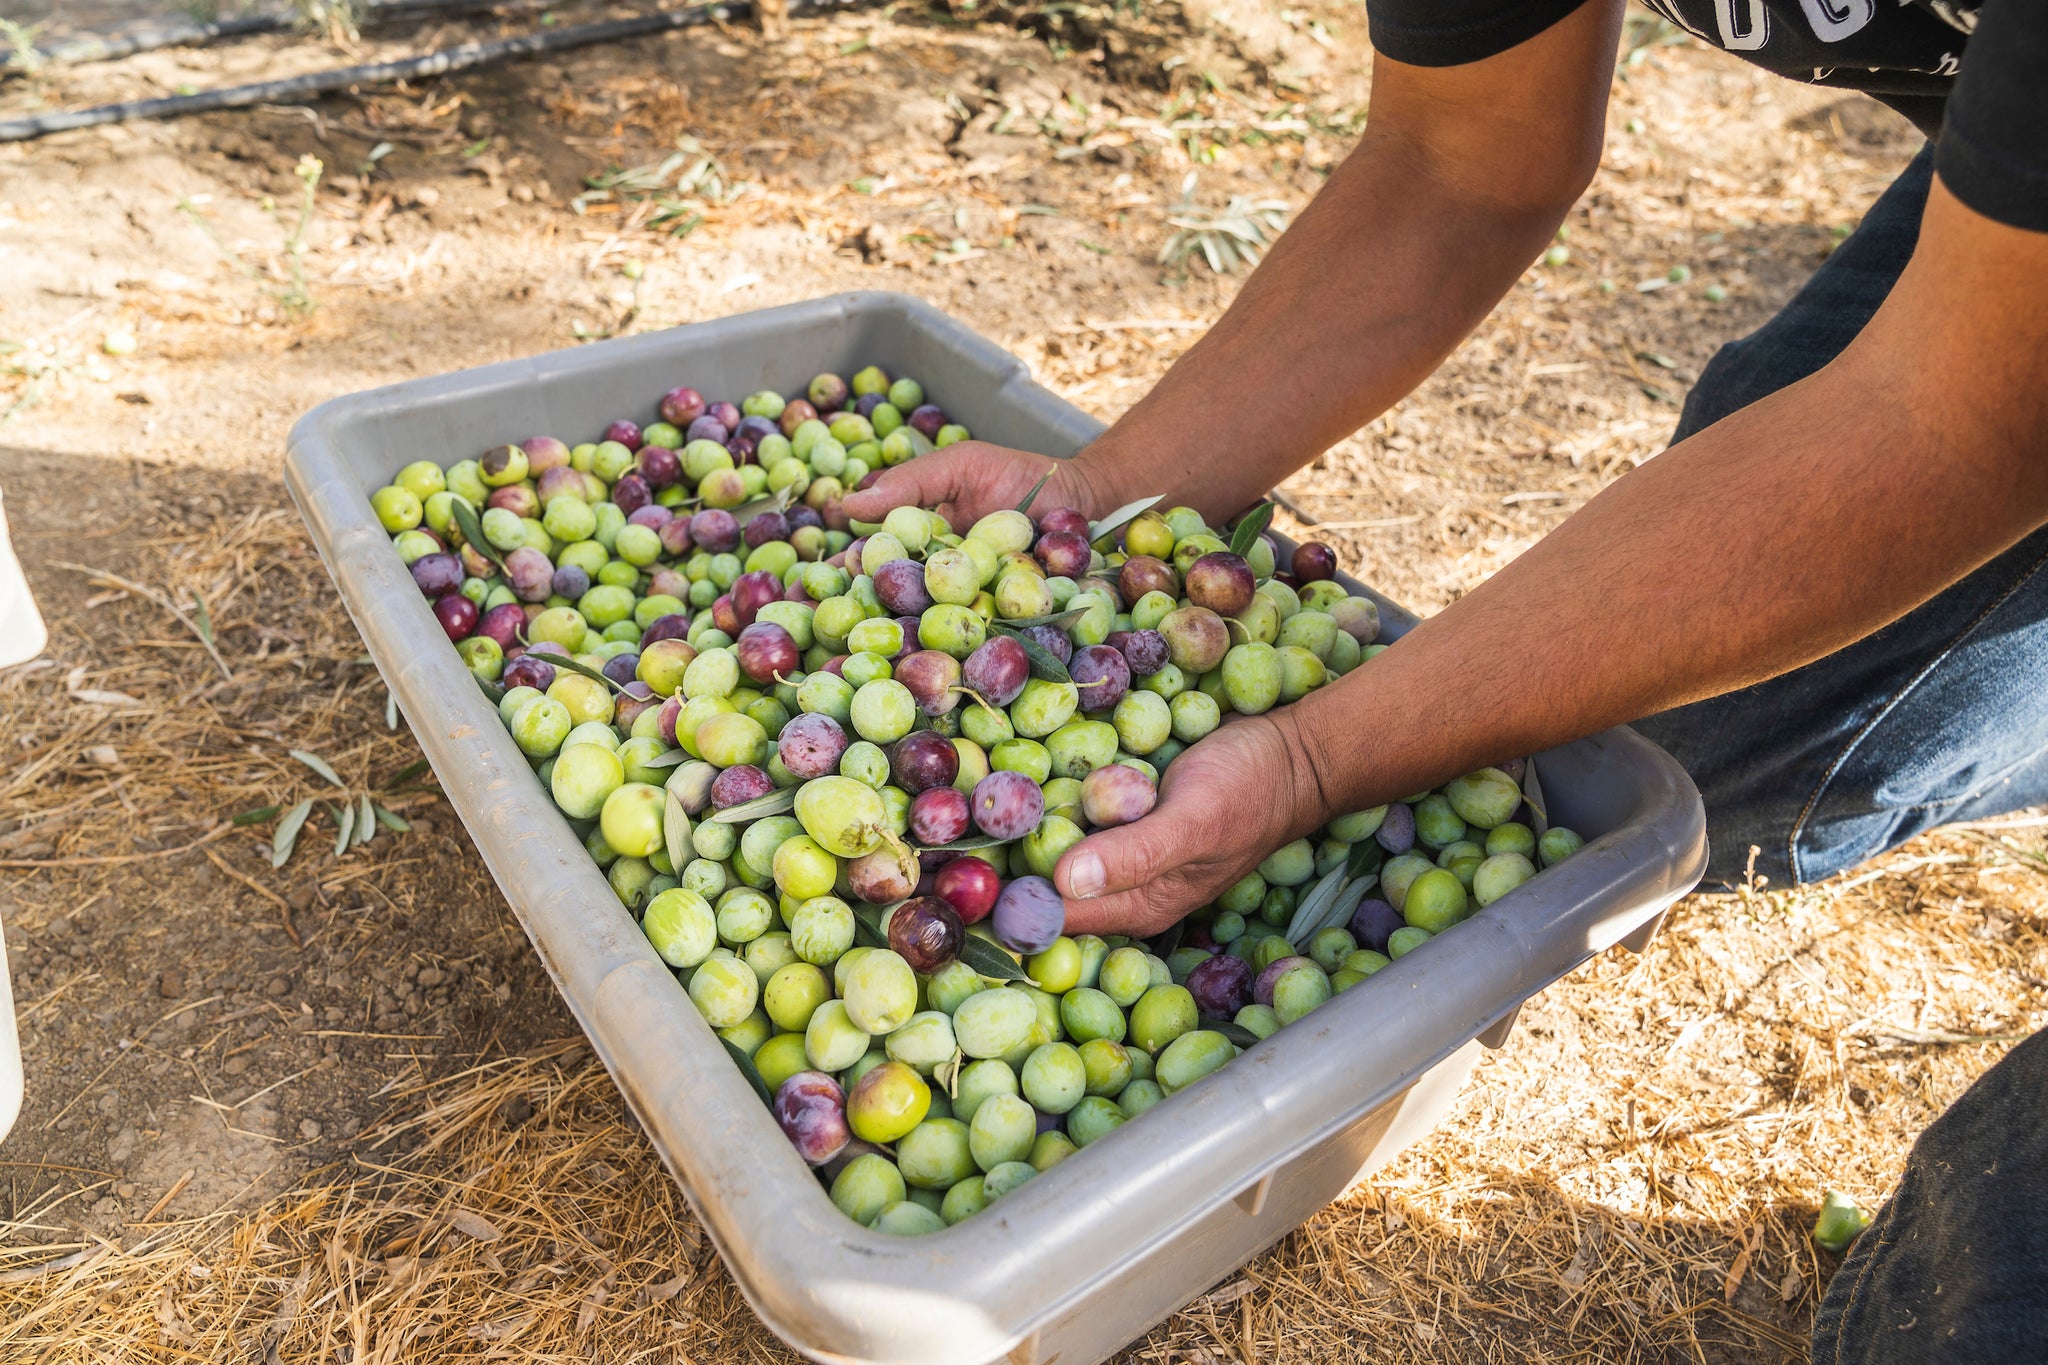 Olives - The Oldest Crop Cultivated by Humans......Ever!